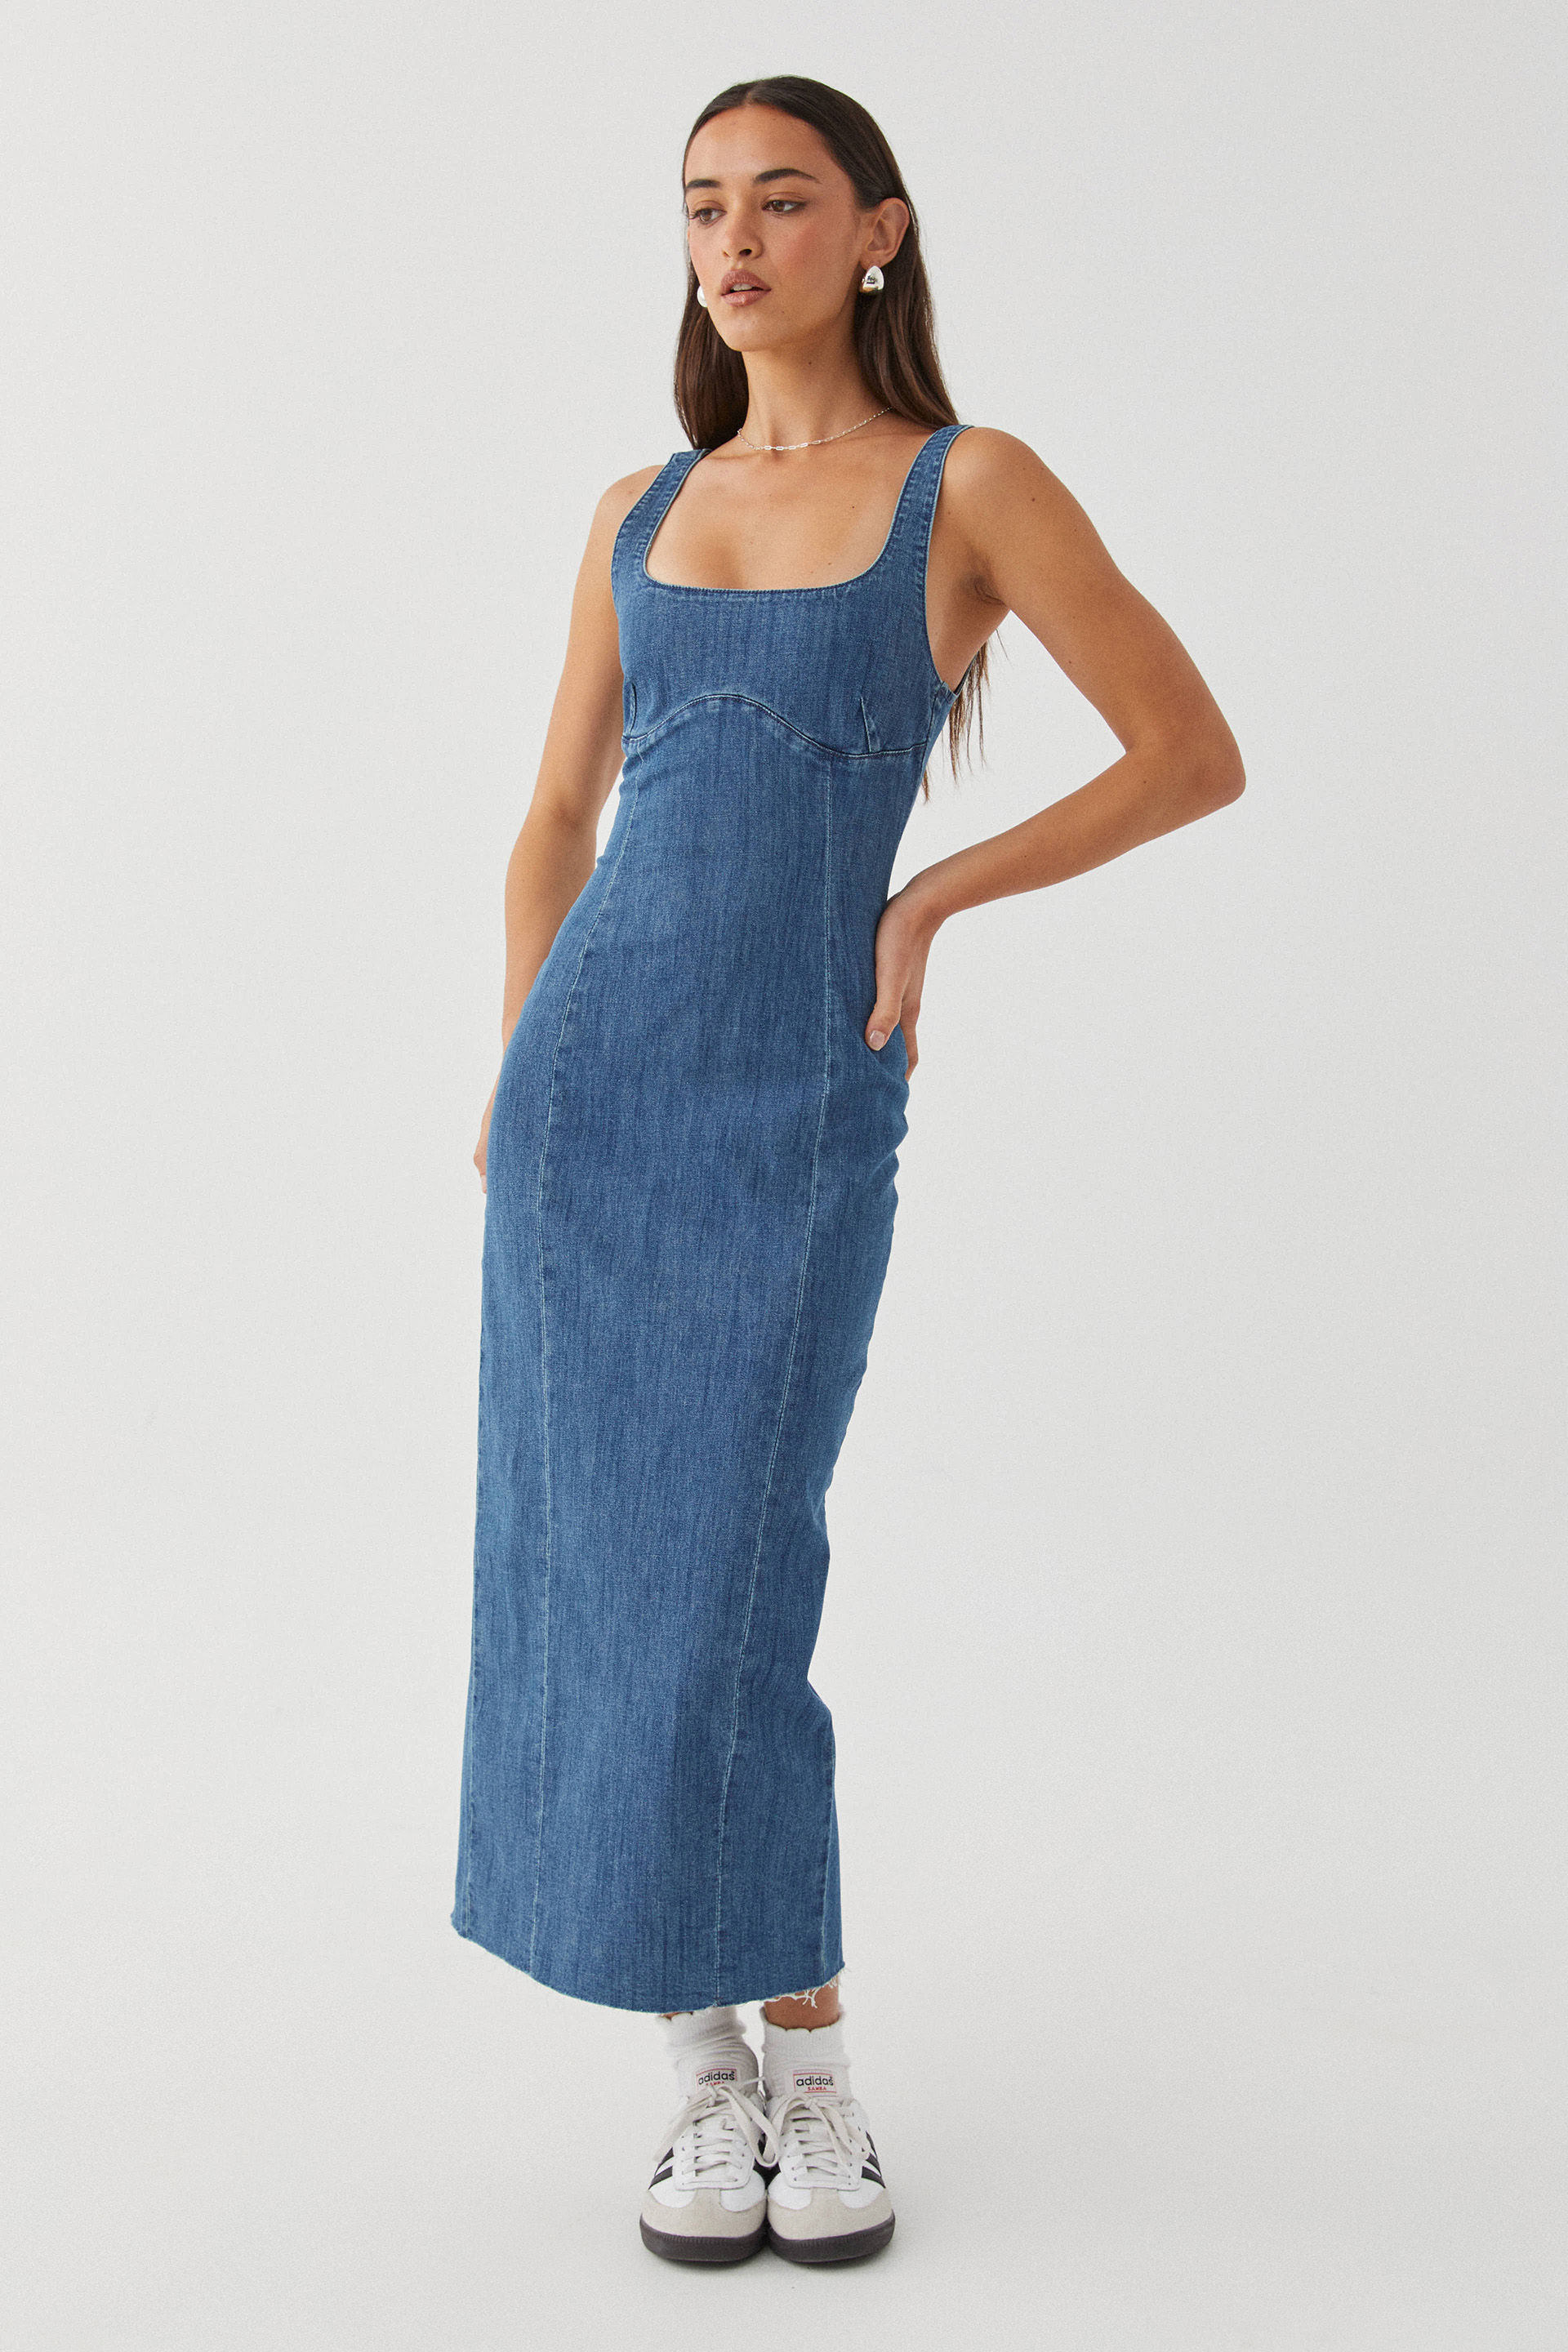 Casual Western Denim Slit Maxi at Rs 300/piece in Surat | ID: 2850631697355